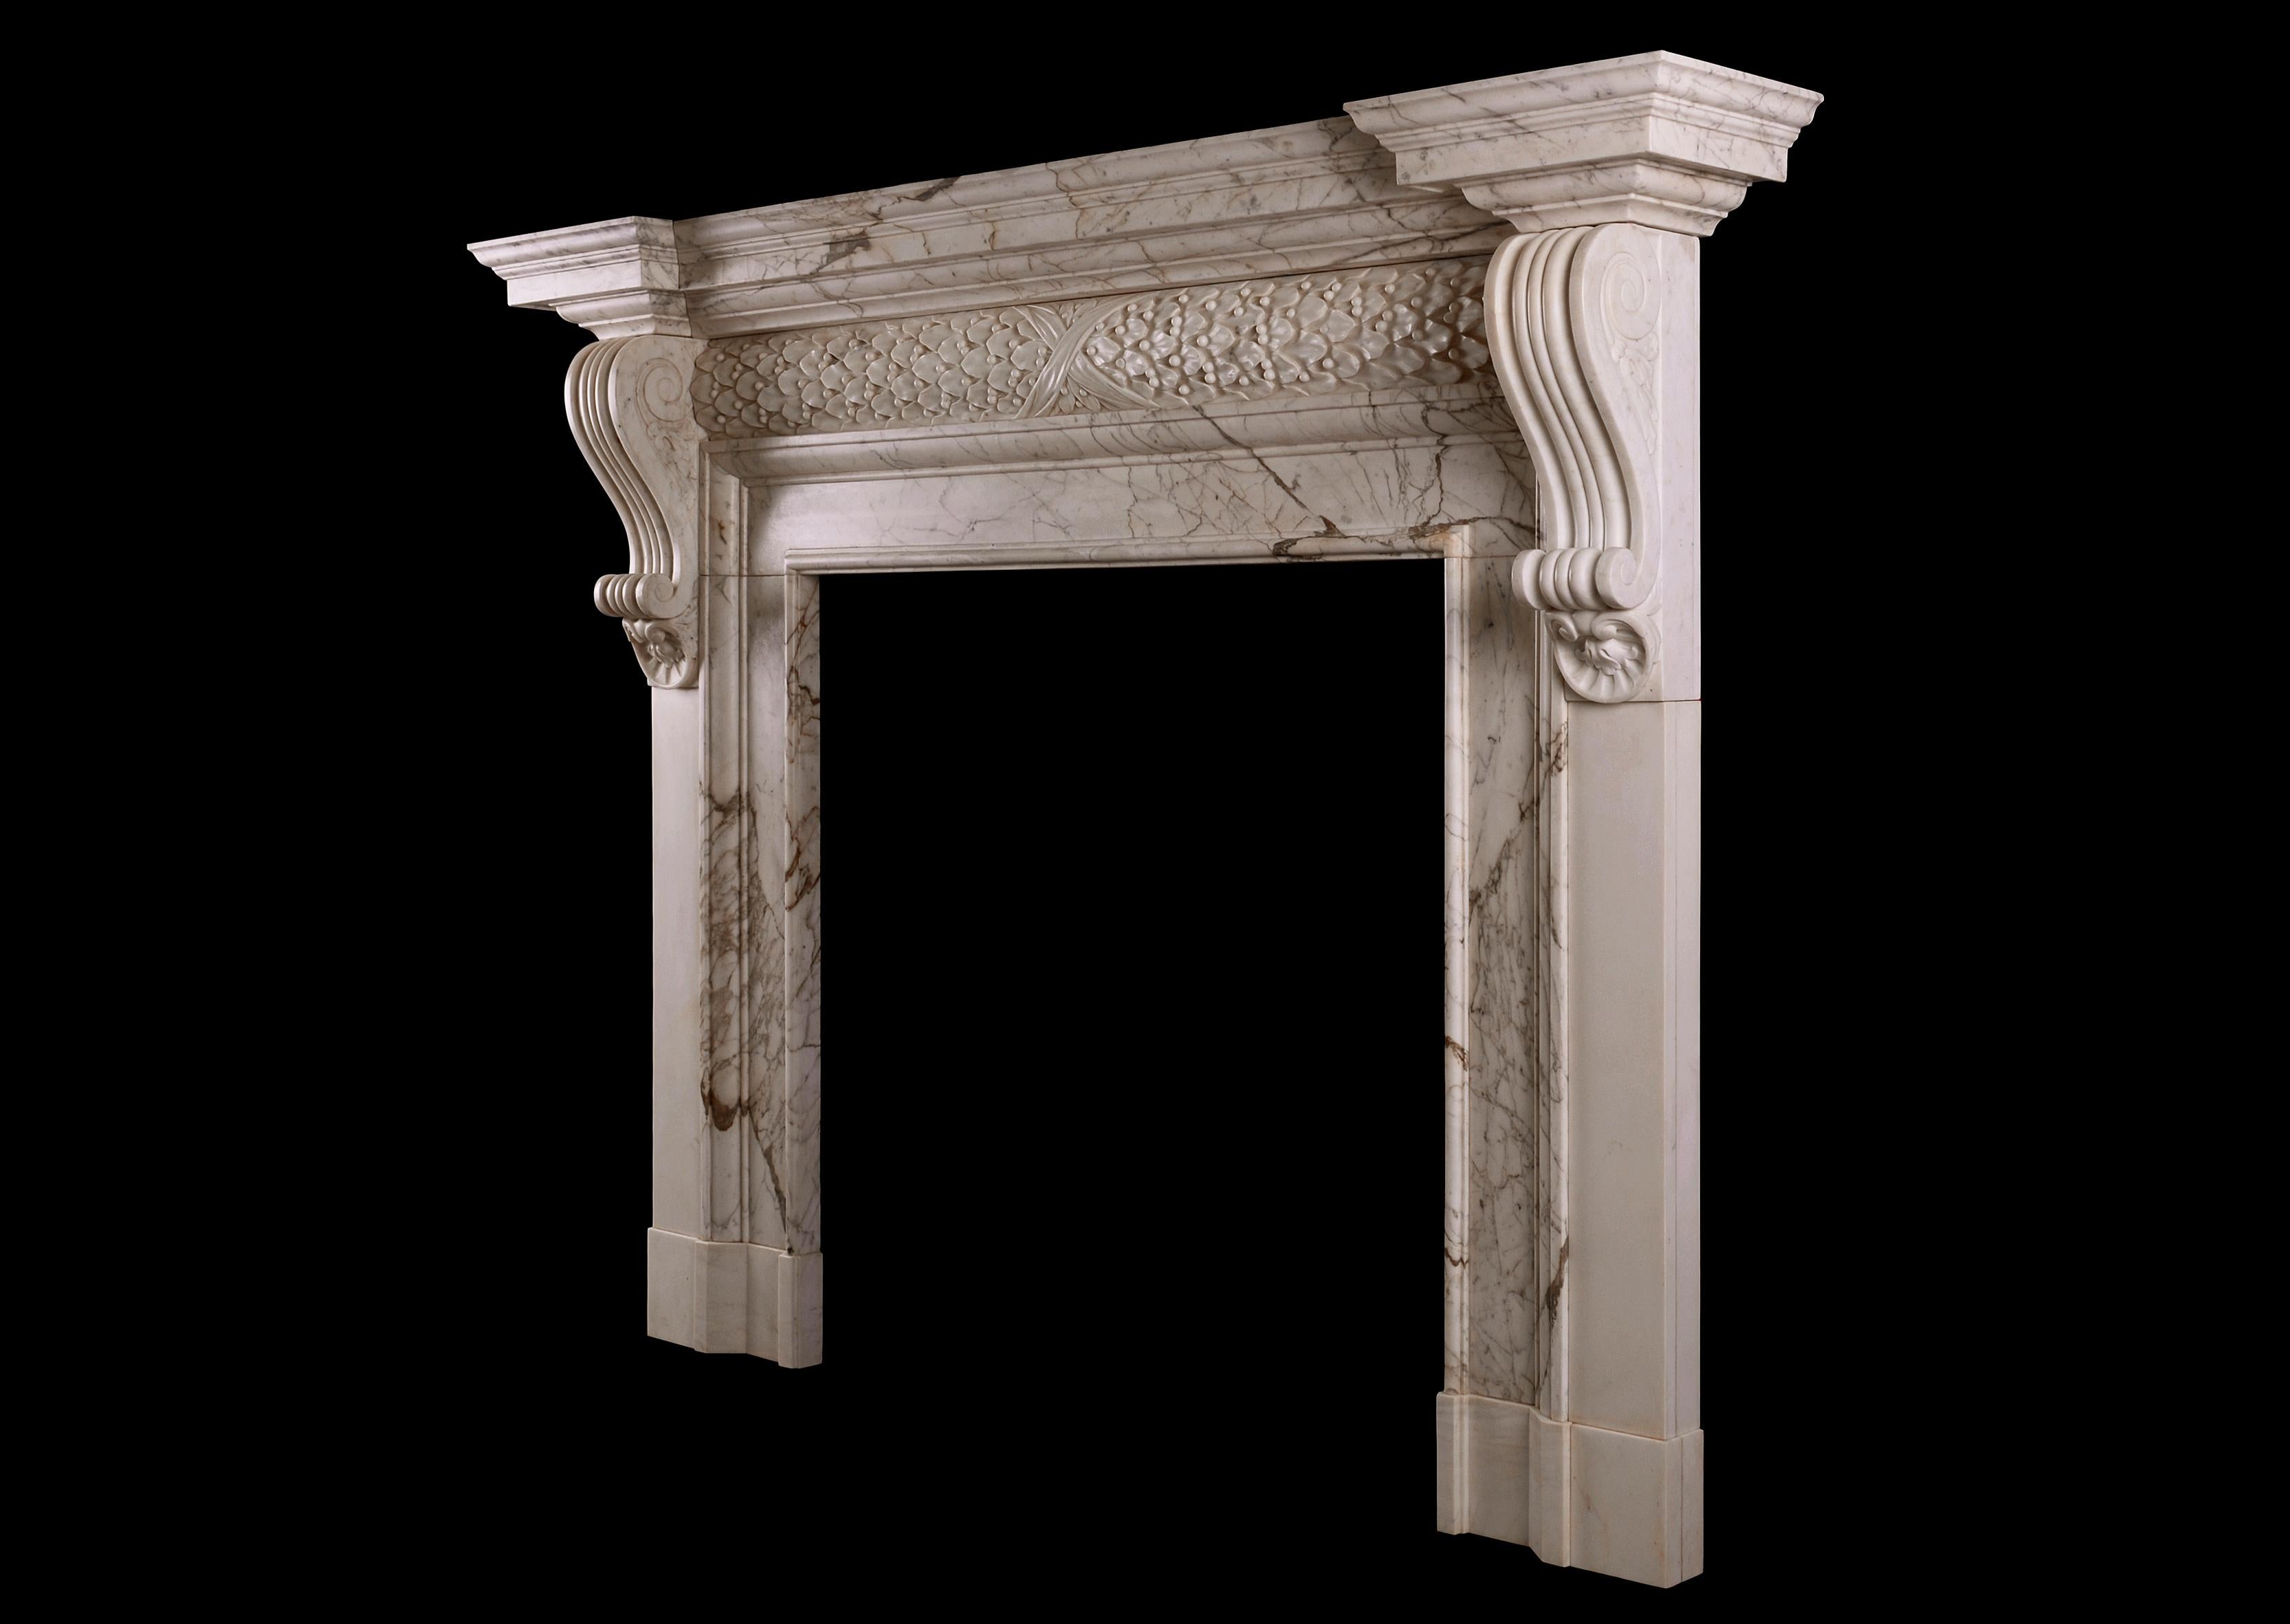 Imposing Period Georgian Fireplace in Calacatta Oro Marble In Good Condition For Sale In London, GB